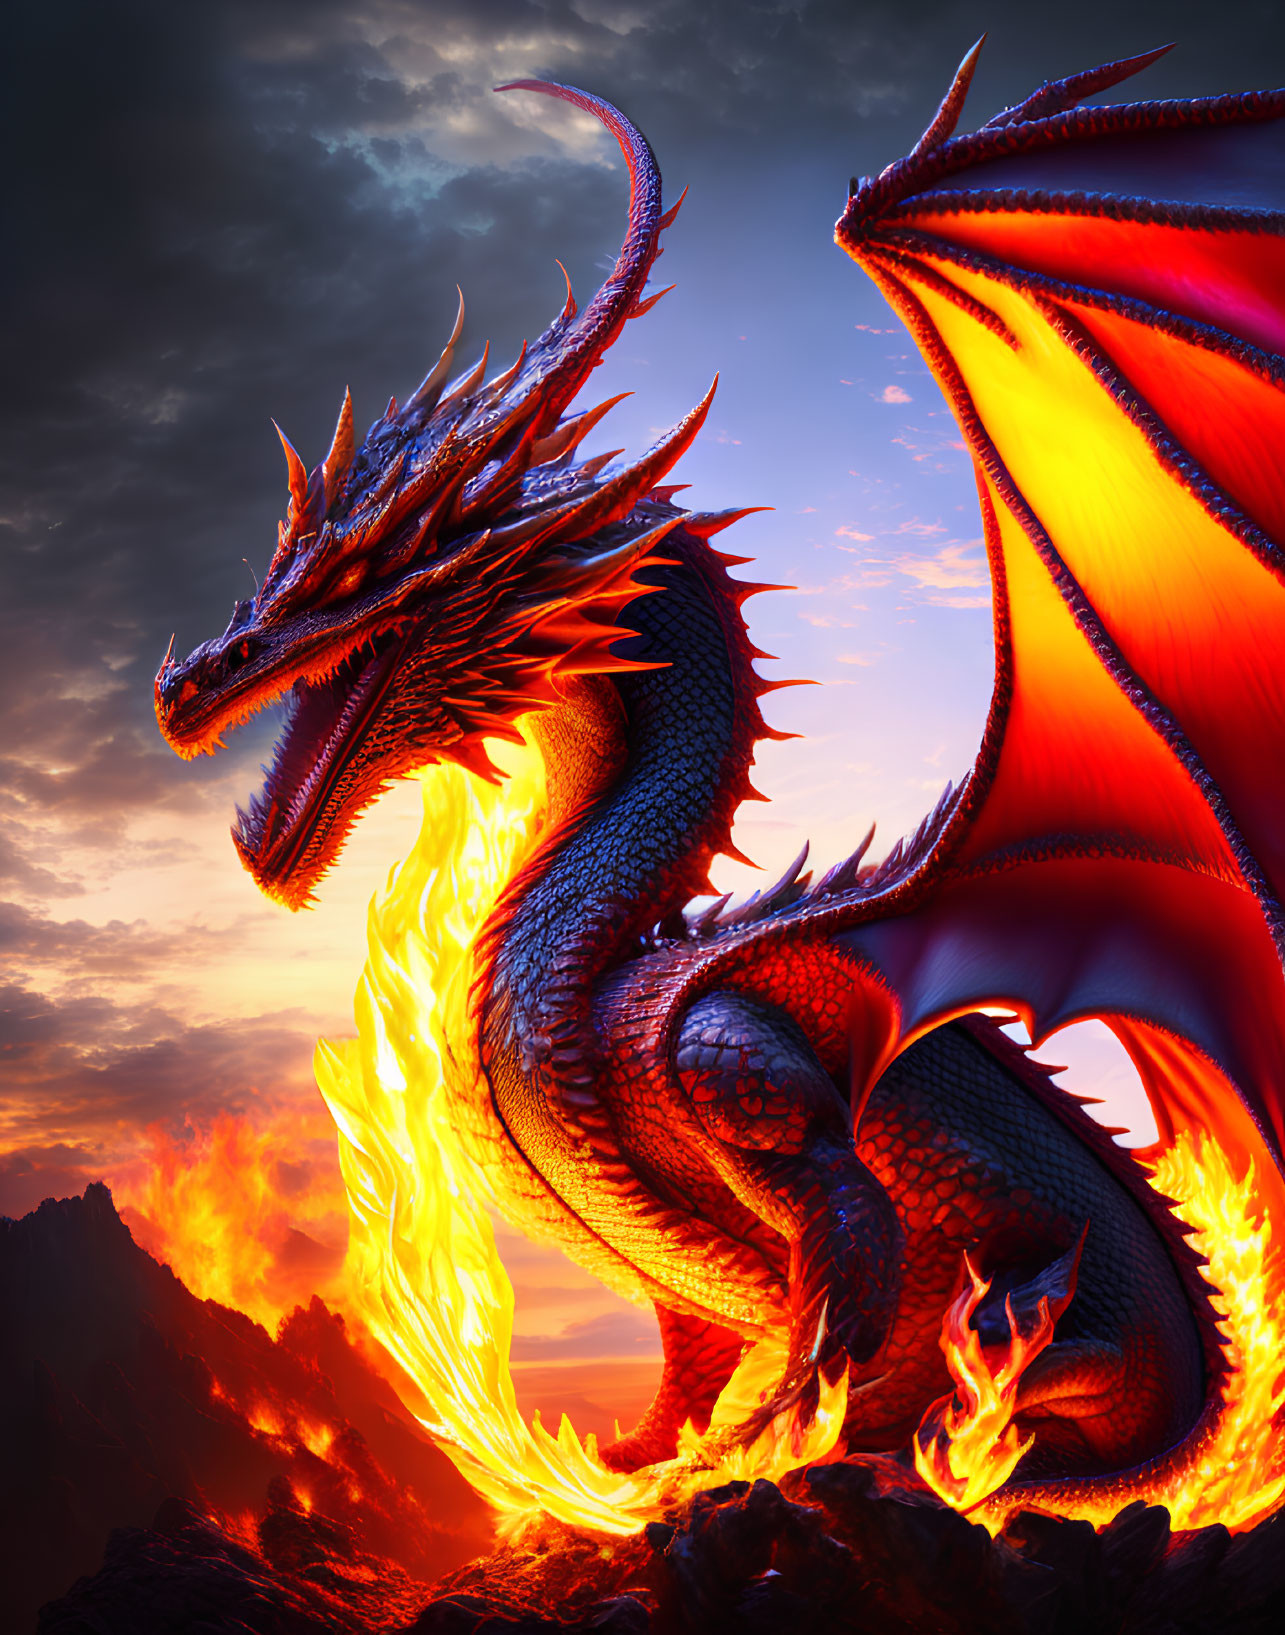 Majestic dragon with flaming wings on a mountain at sunset